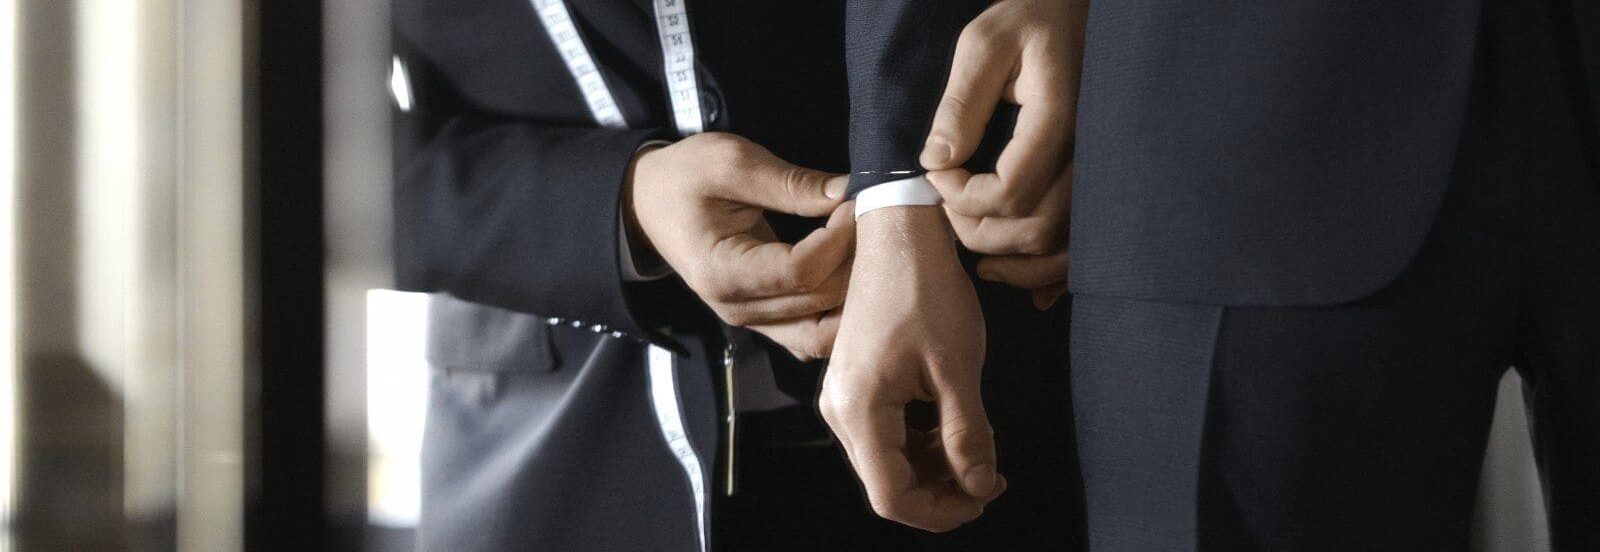 A man tying another mans tie on his suit.